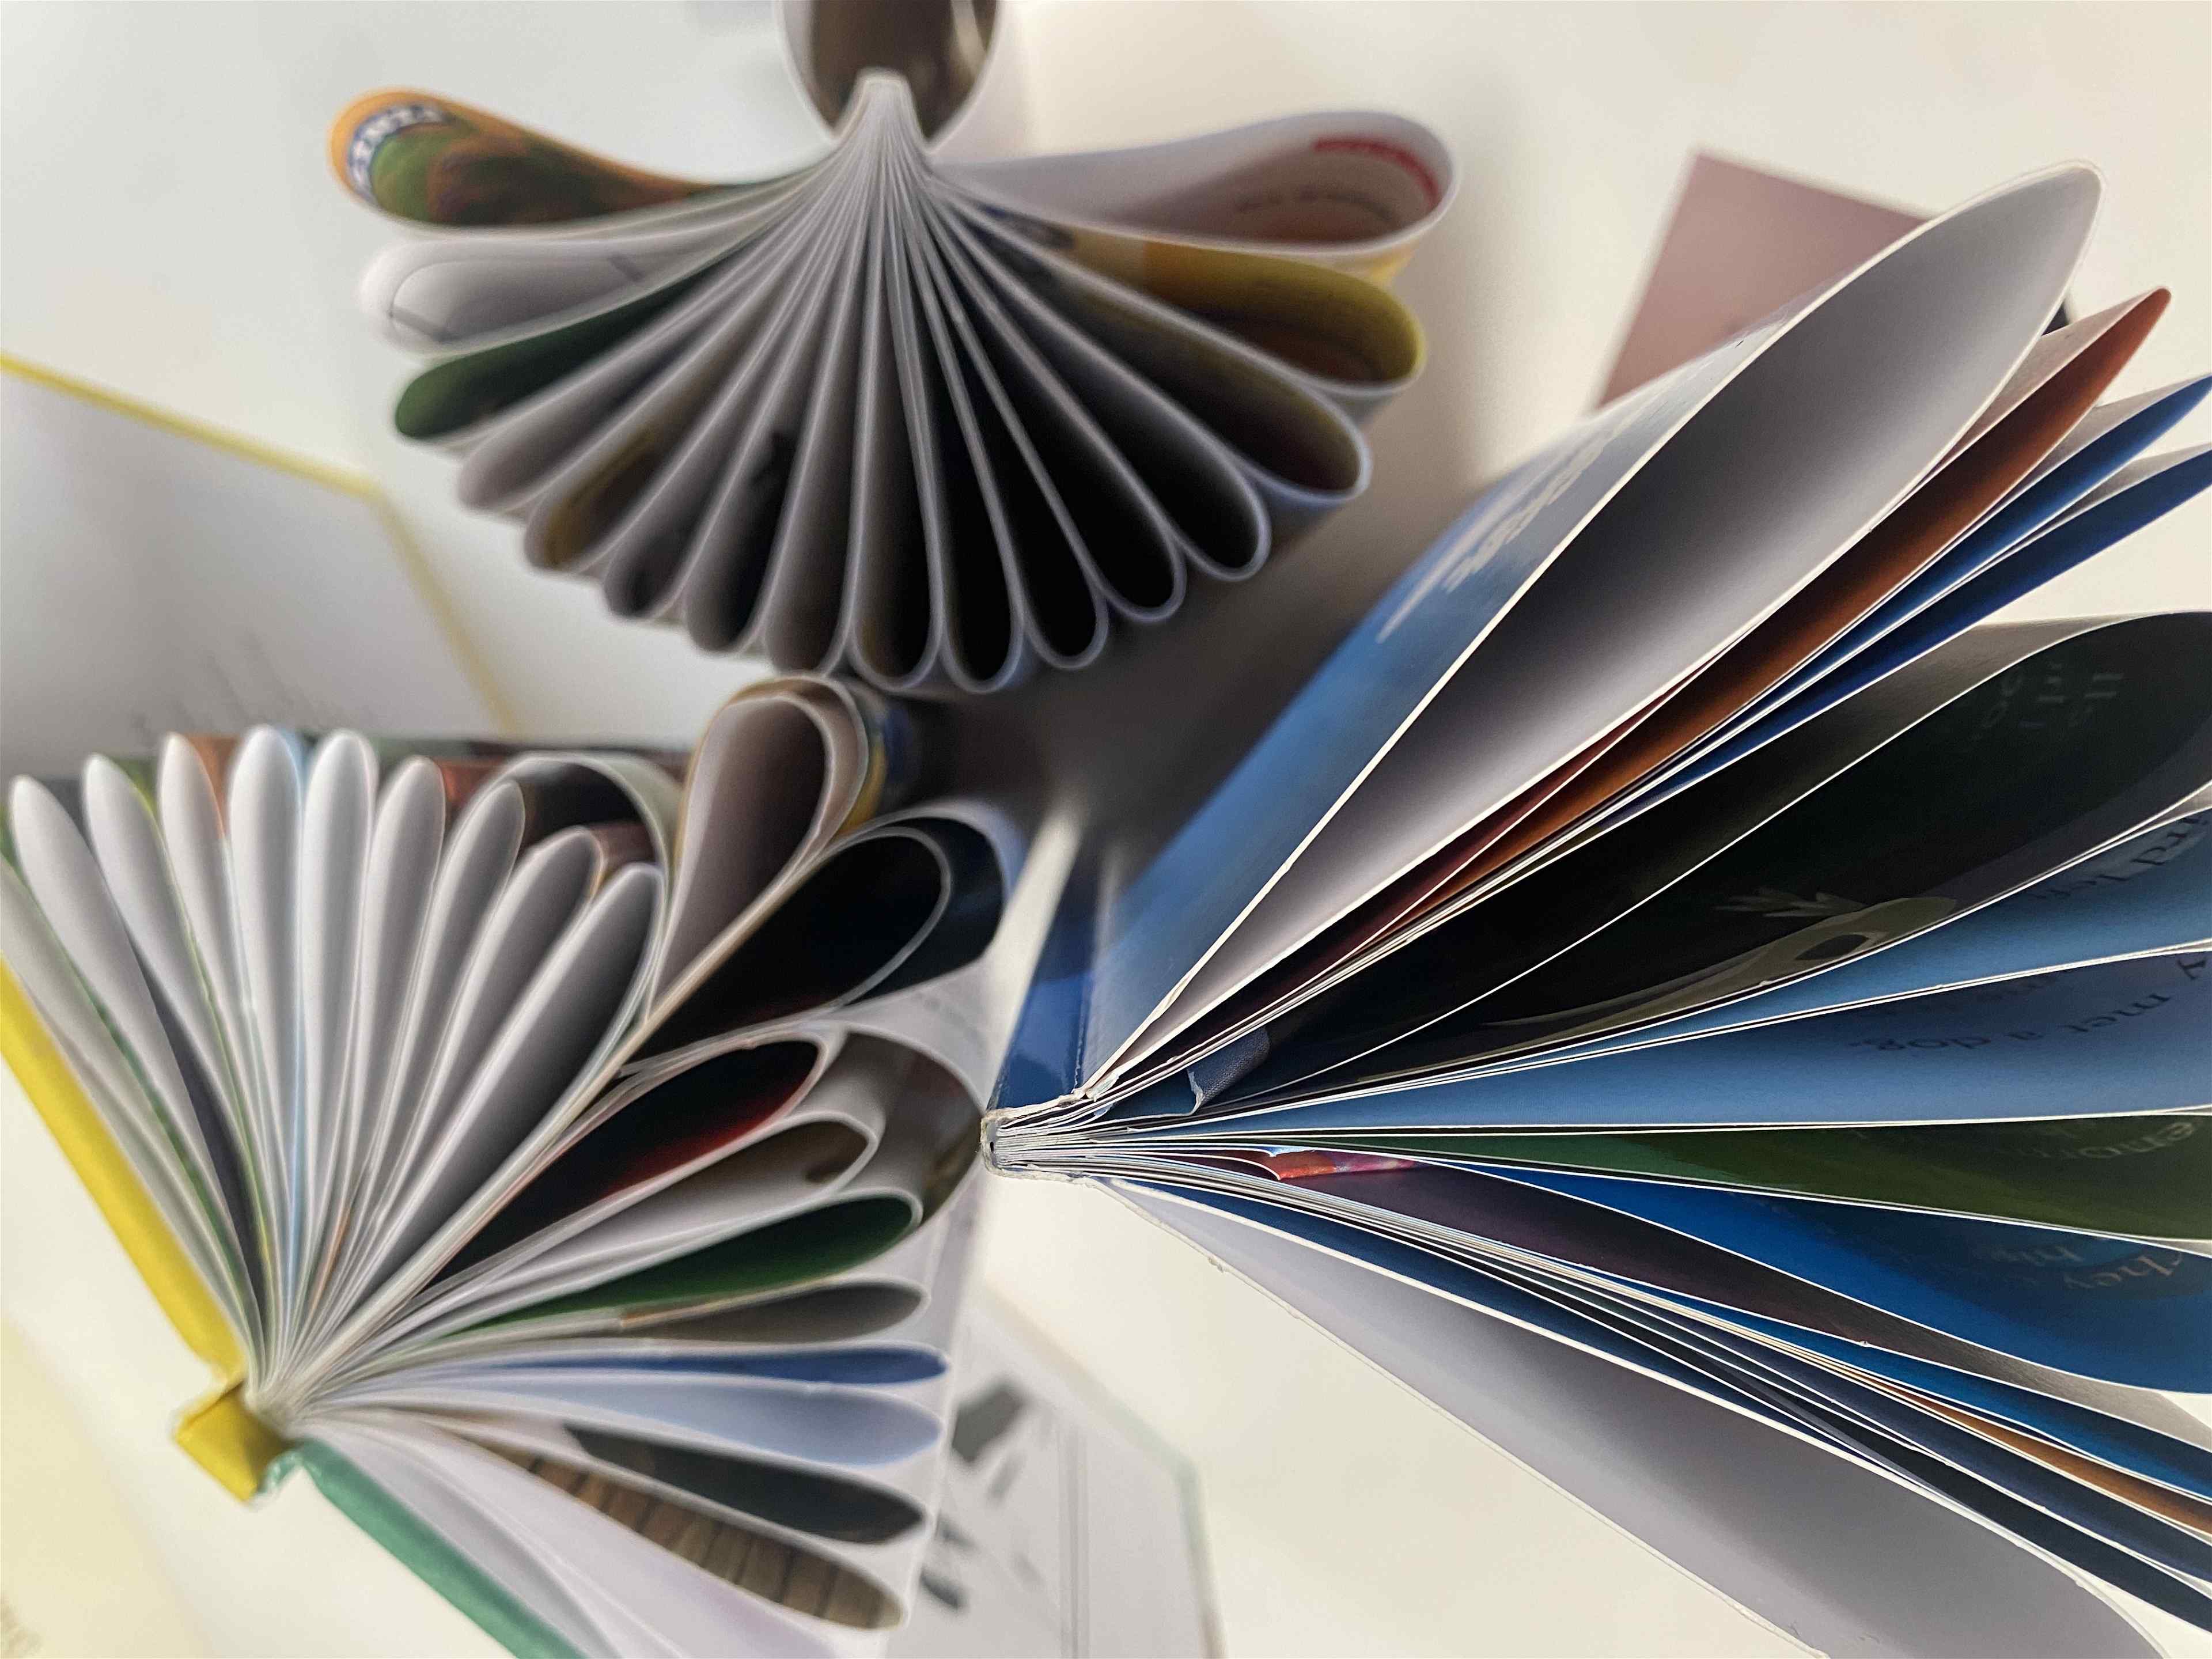 Book sculptures: how to give pre-loved books a new life